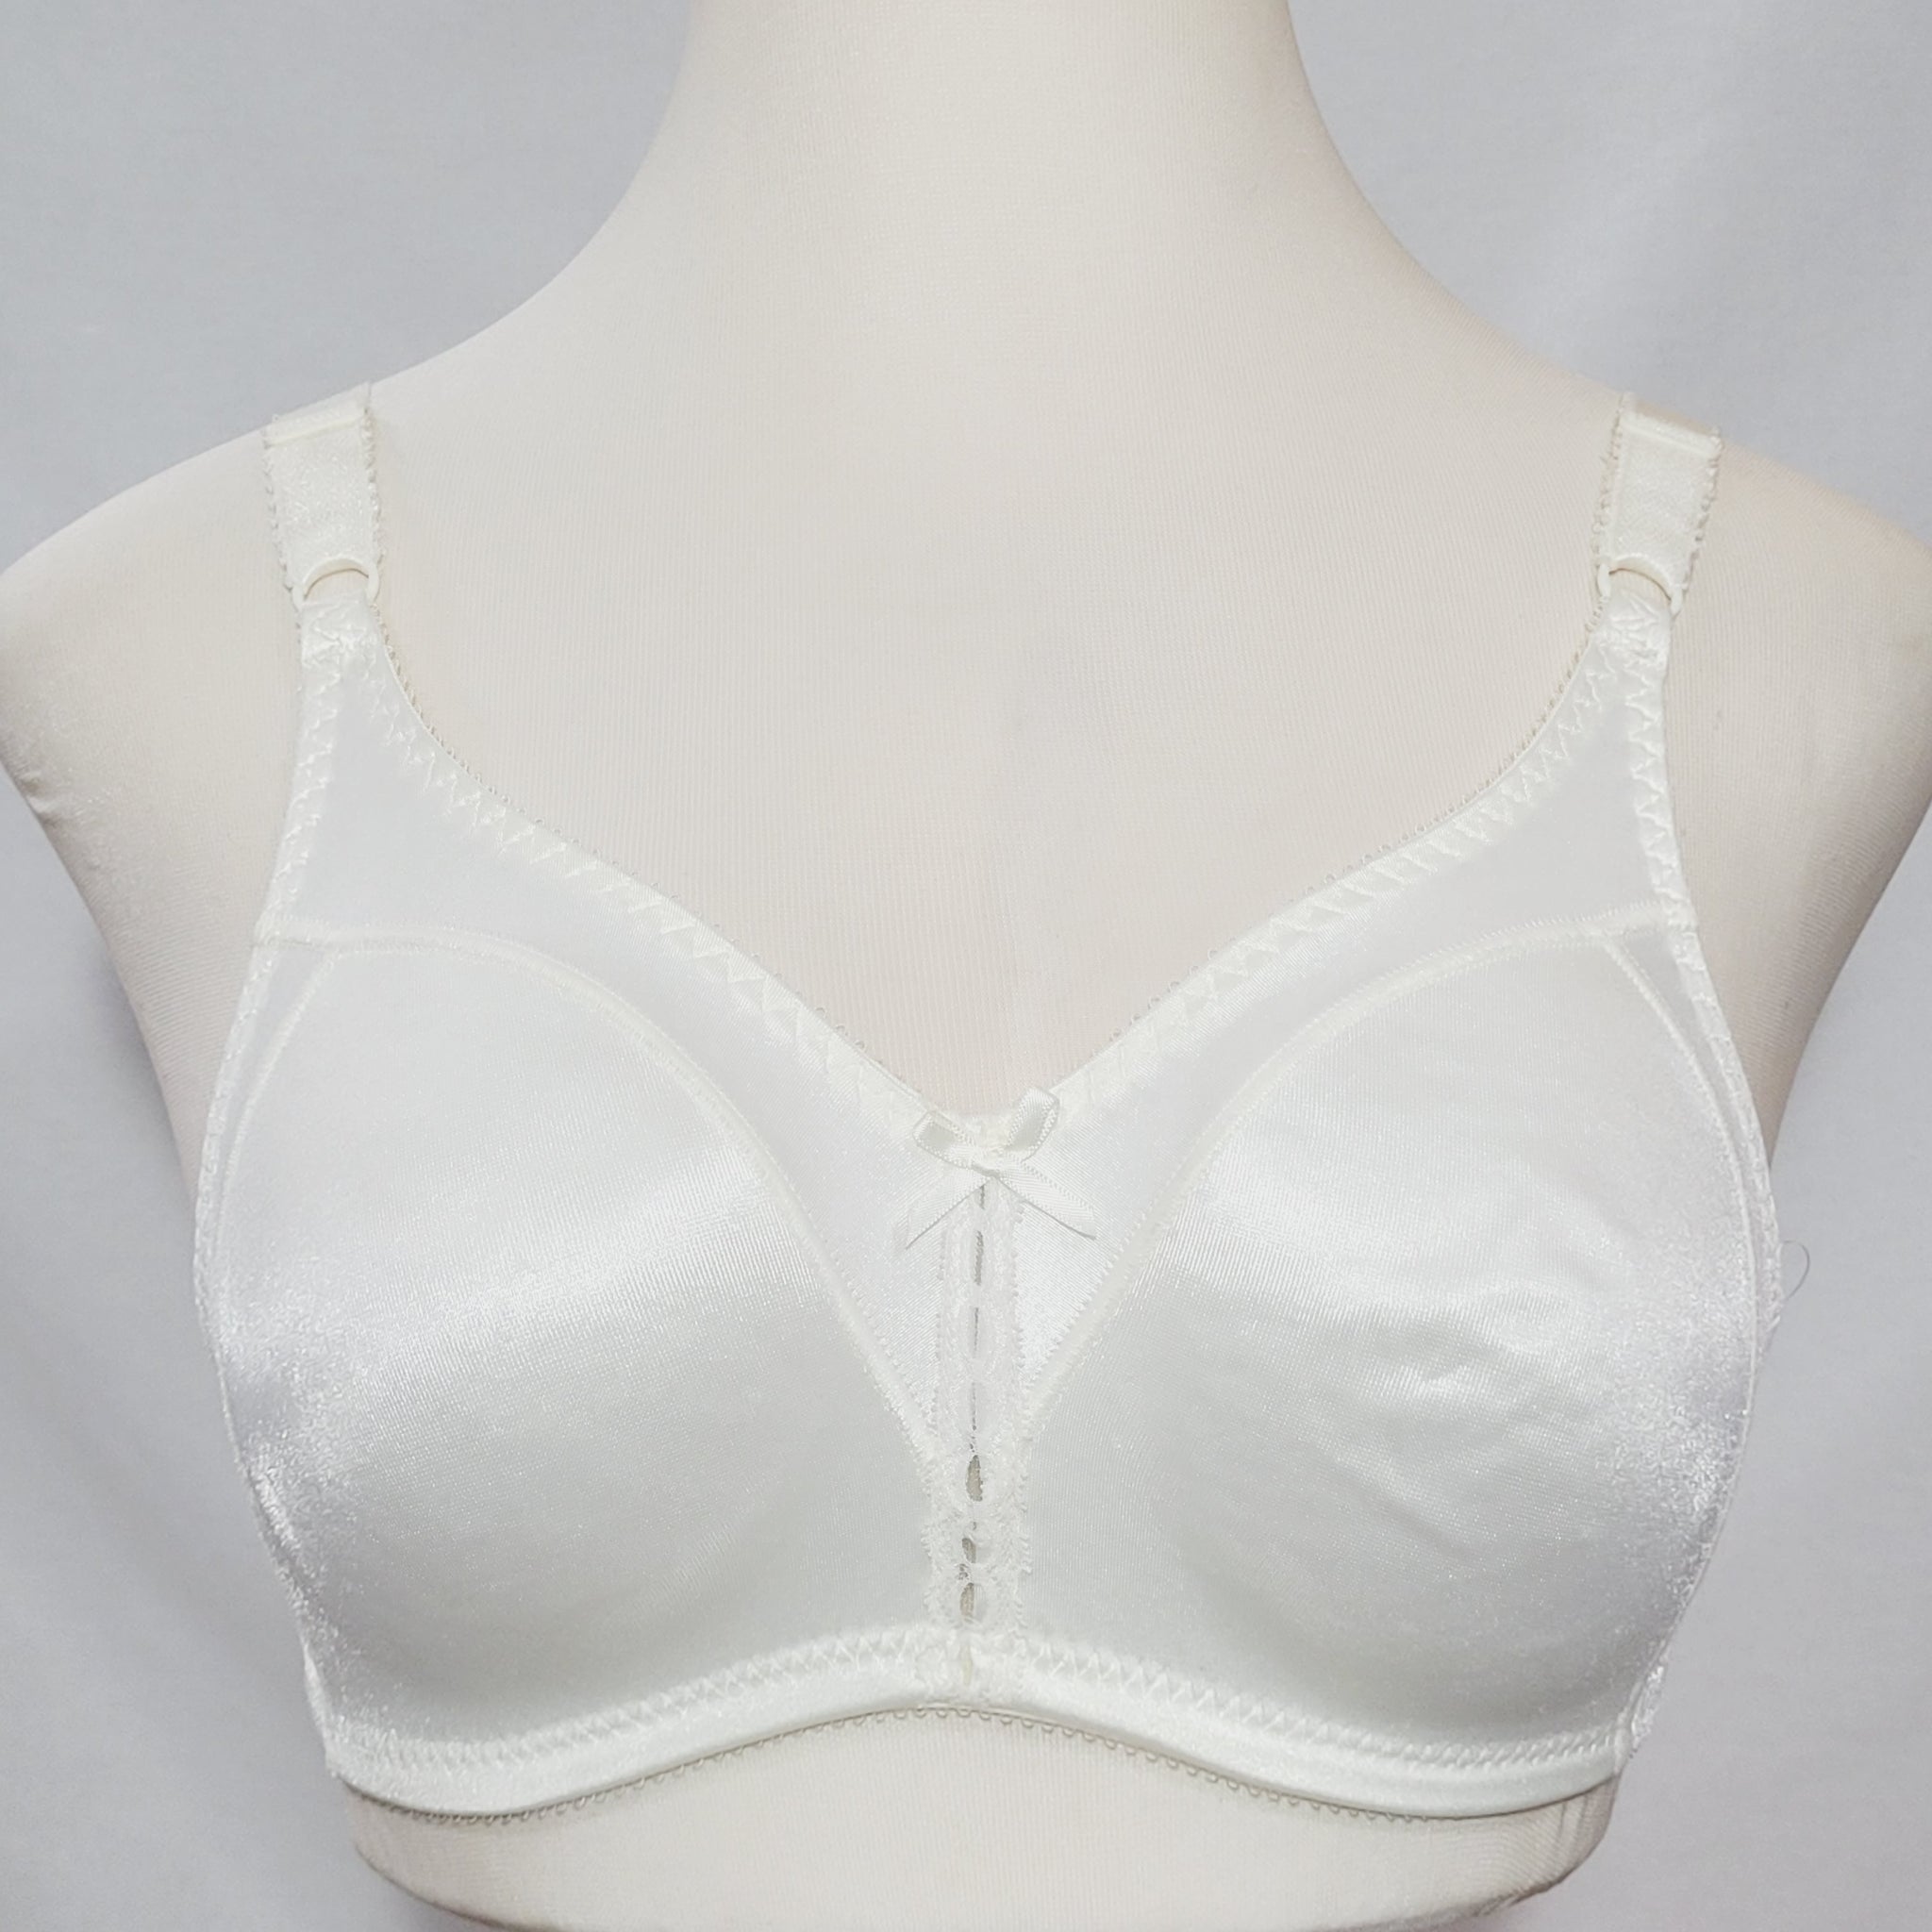  Bali Womens Double Support Wirefree Bra